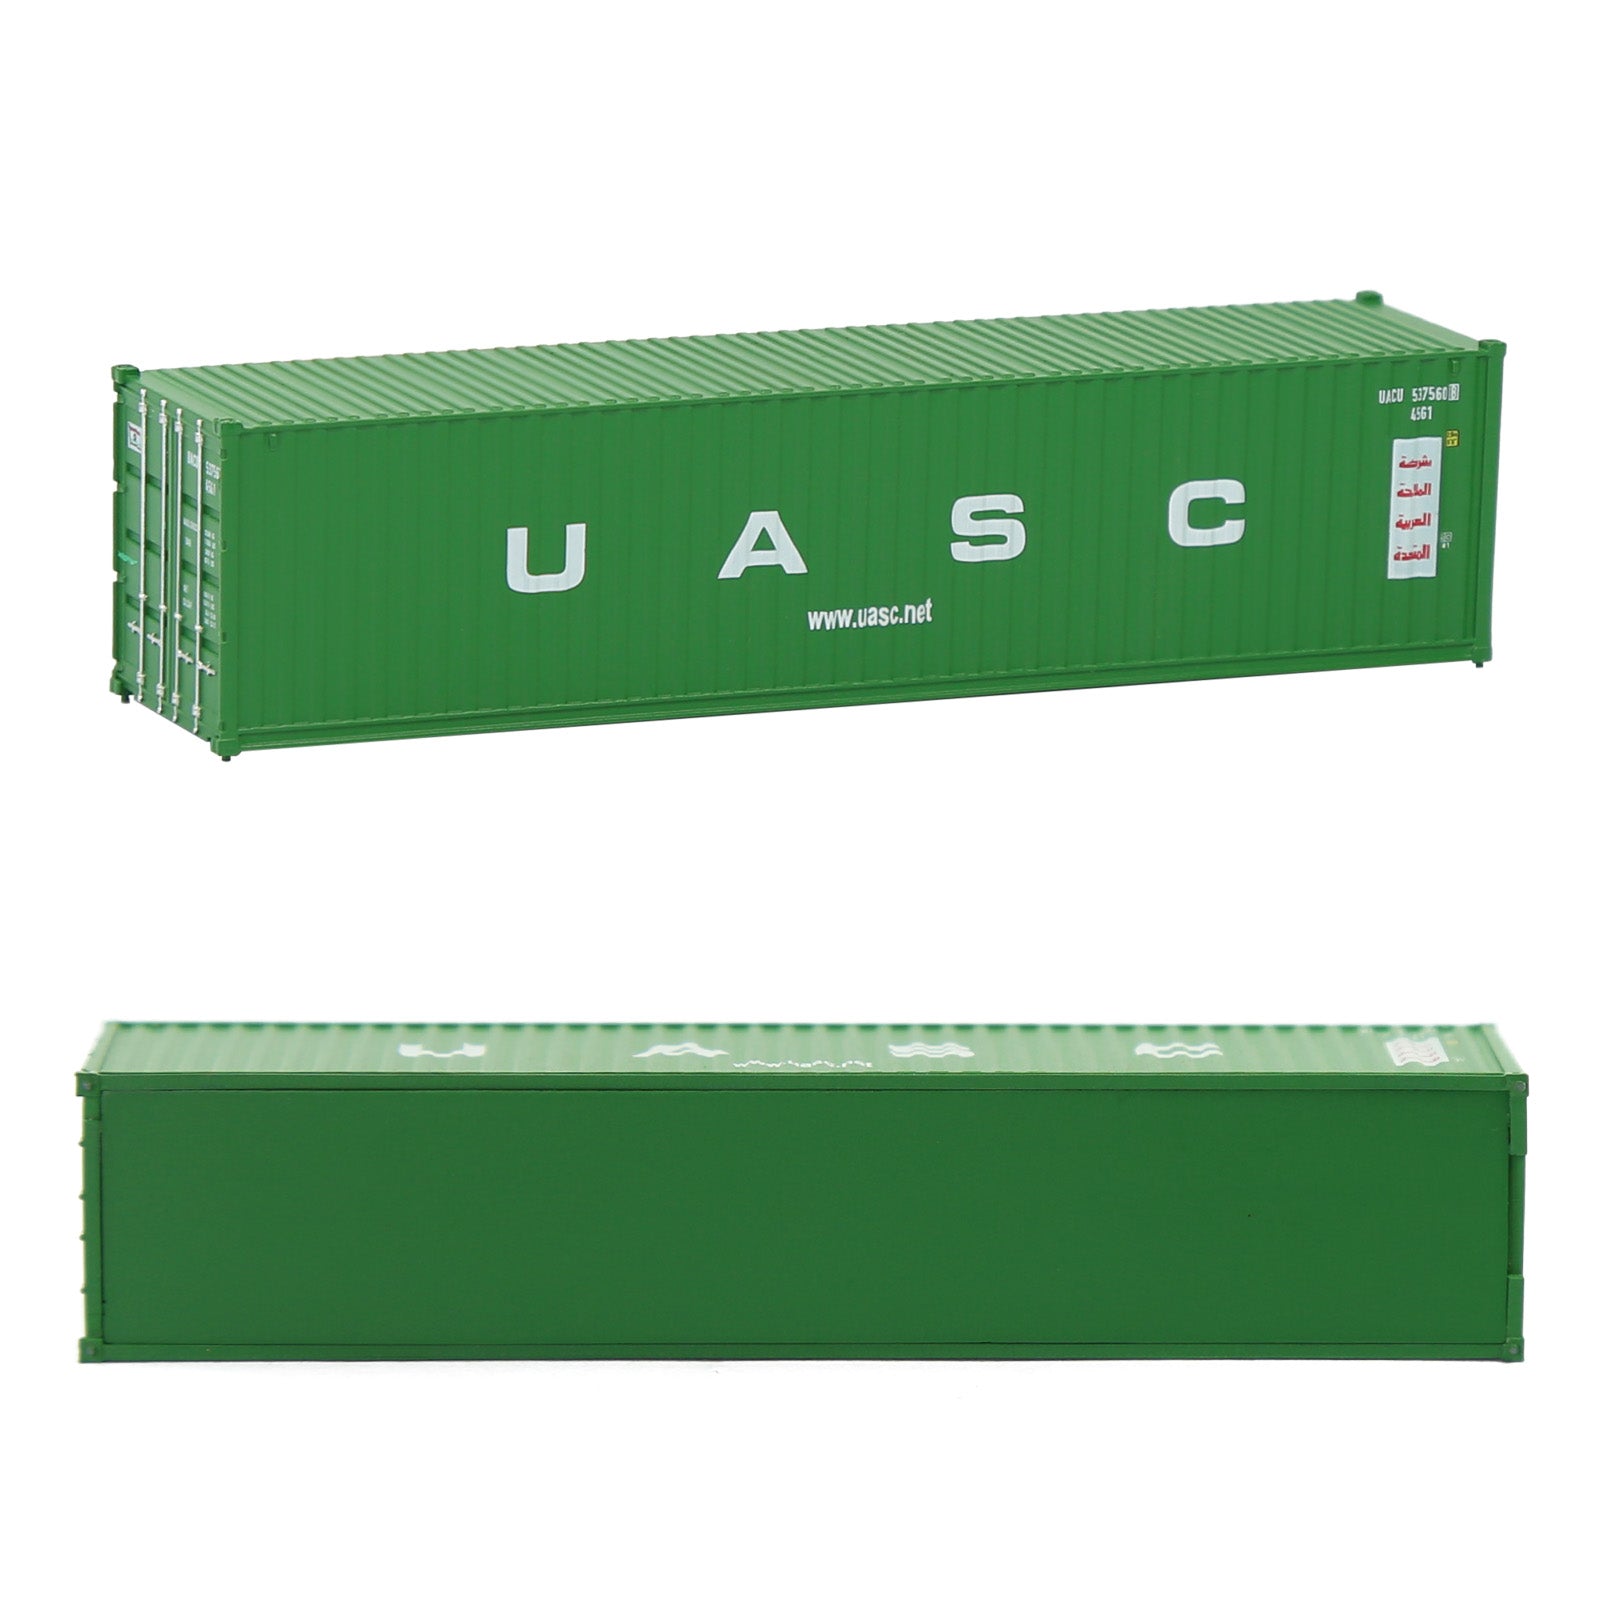 C15008 3pcs N Scale 1:160 40ft Shipping Container